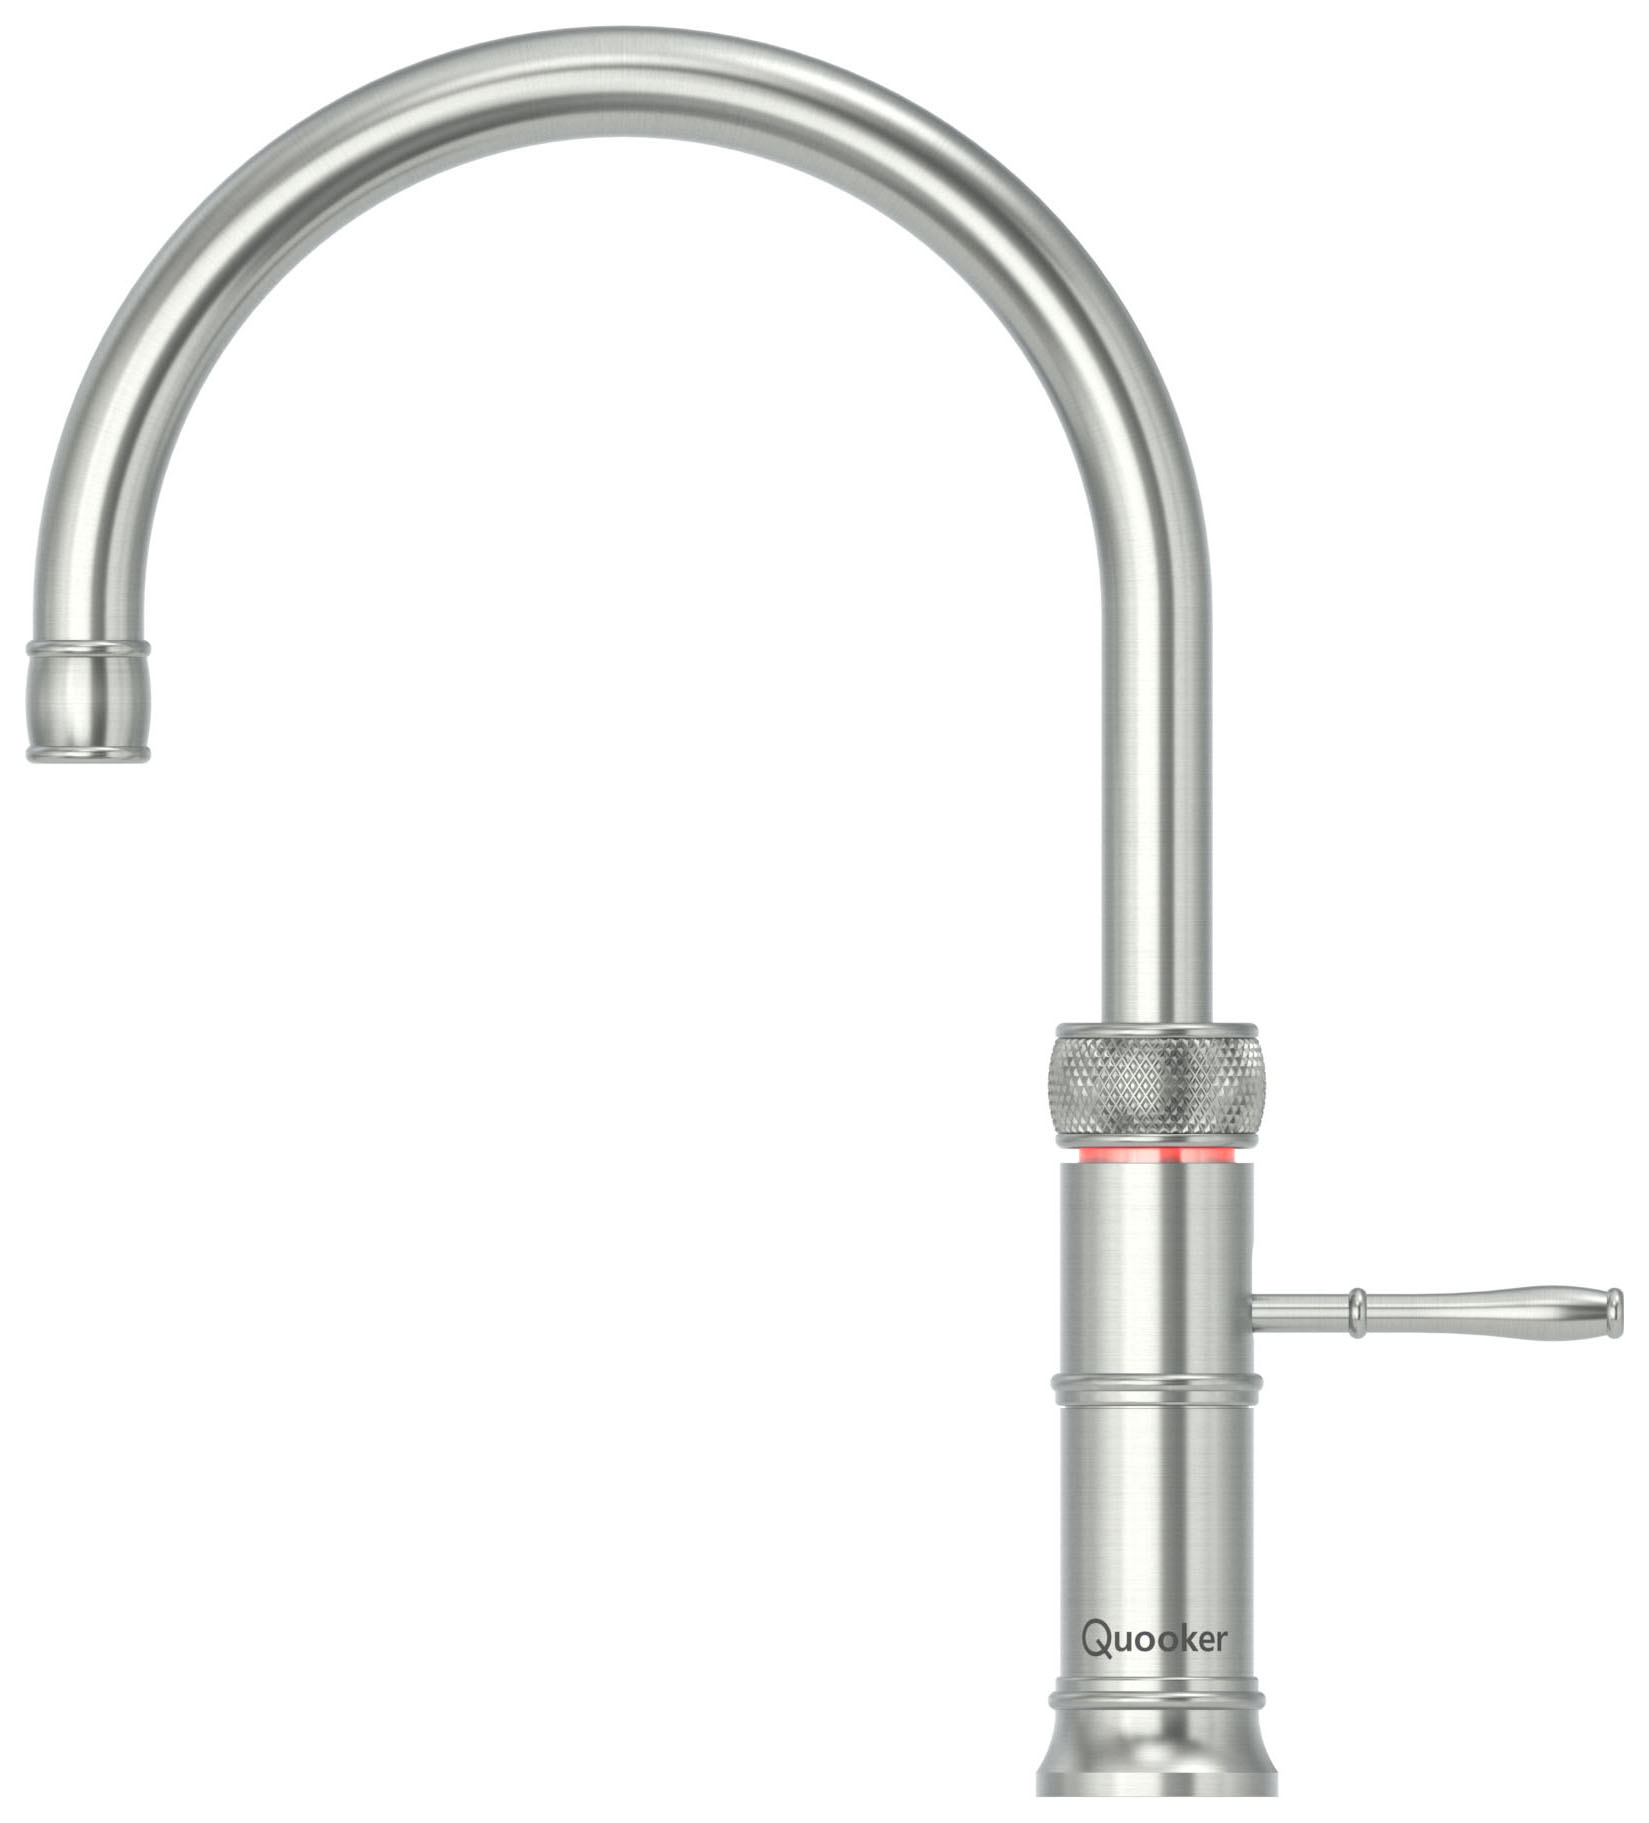 Quooker PRO3 Classic Fusion Round Kitchen Tap -